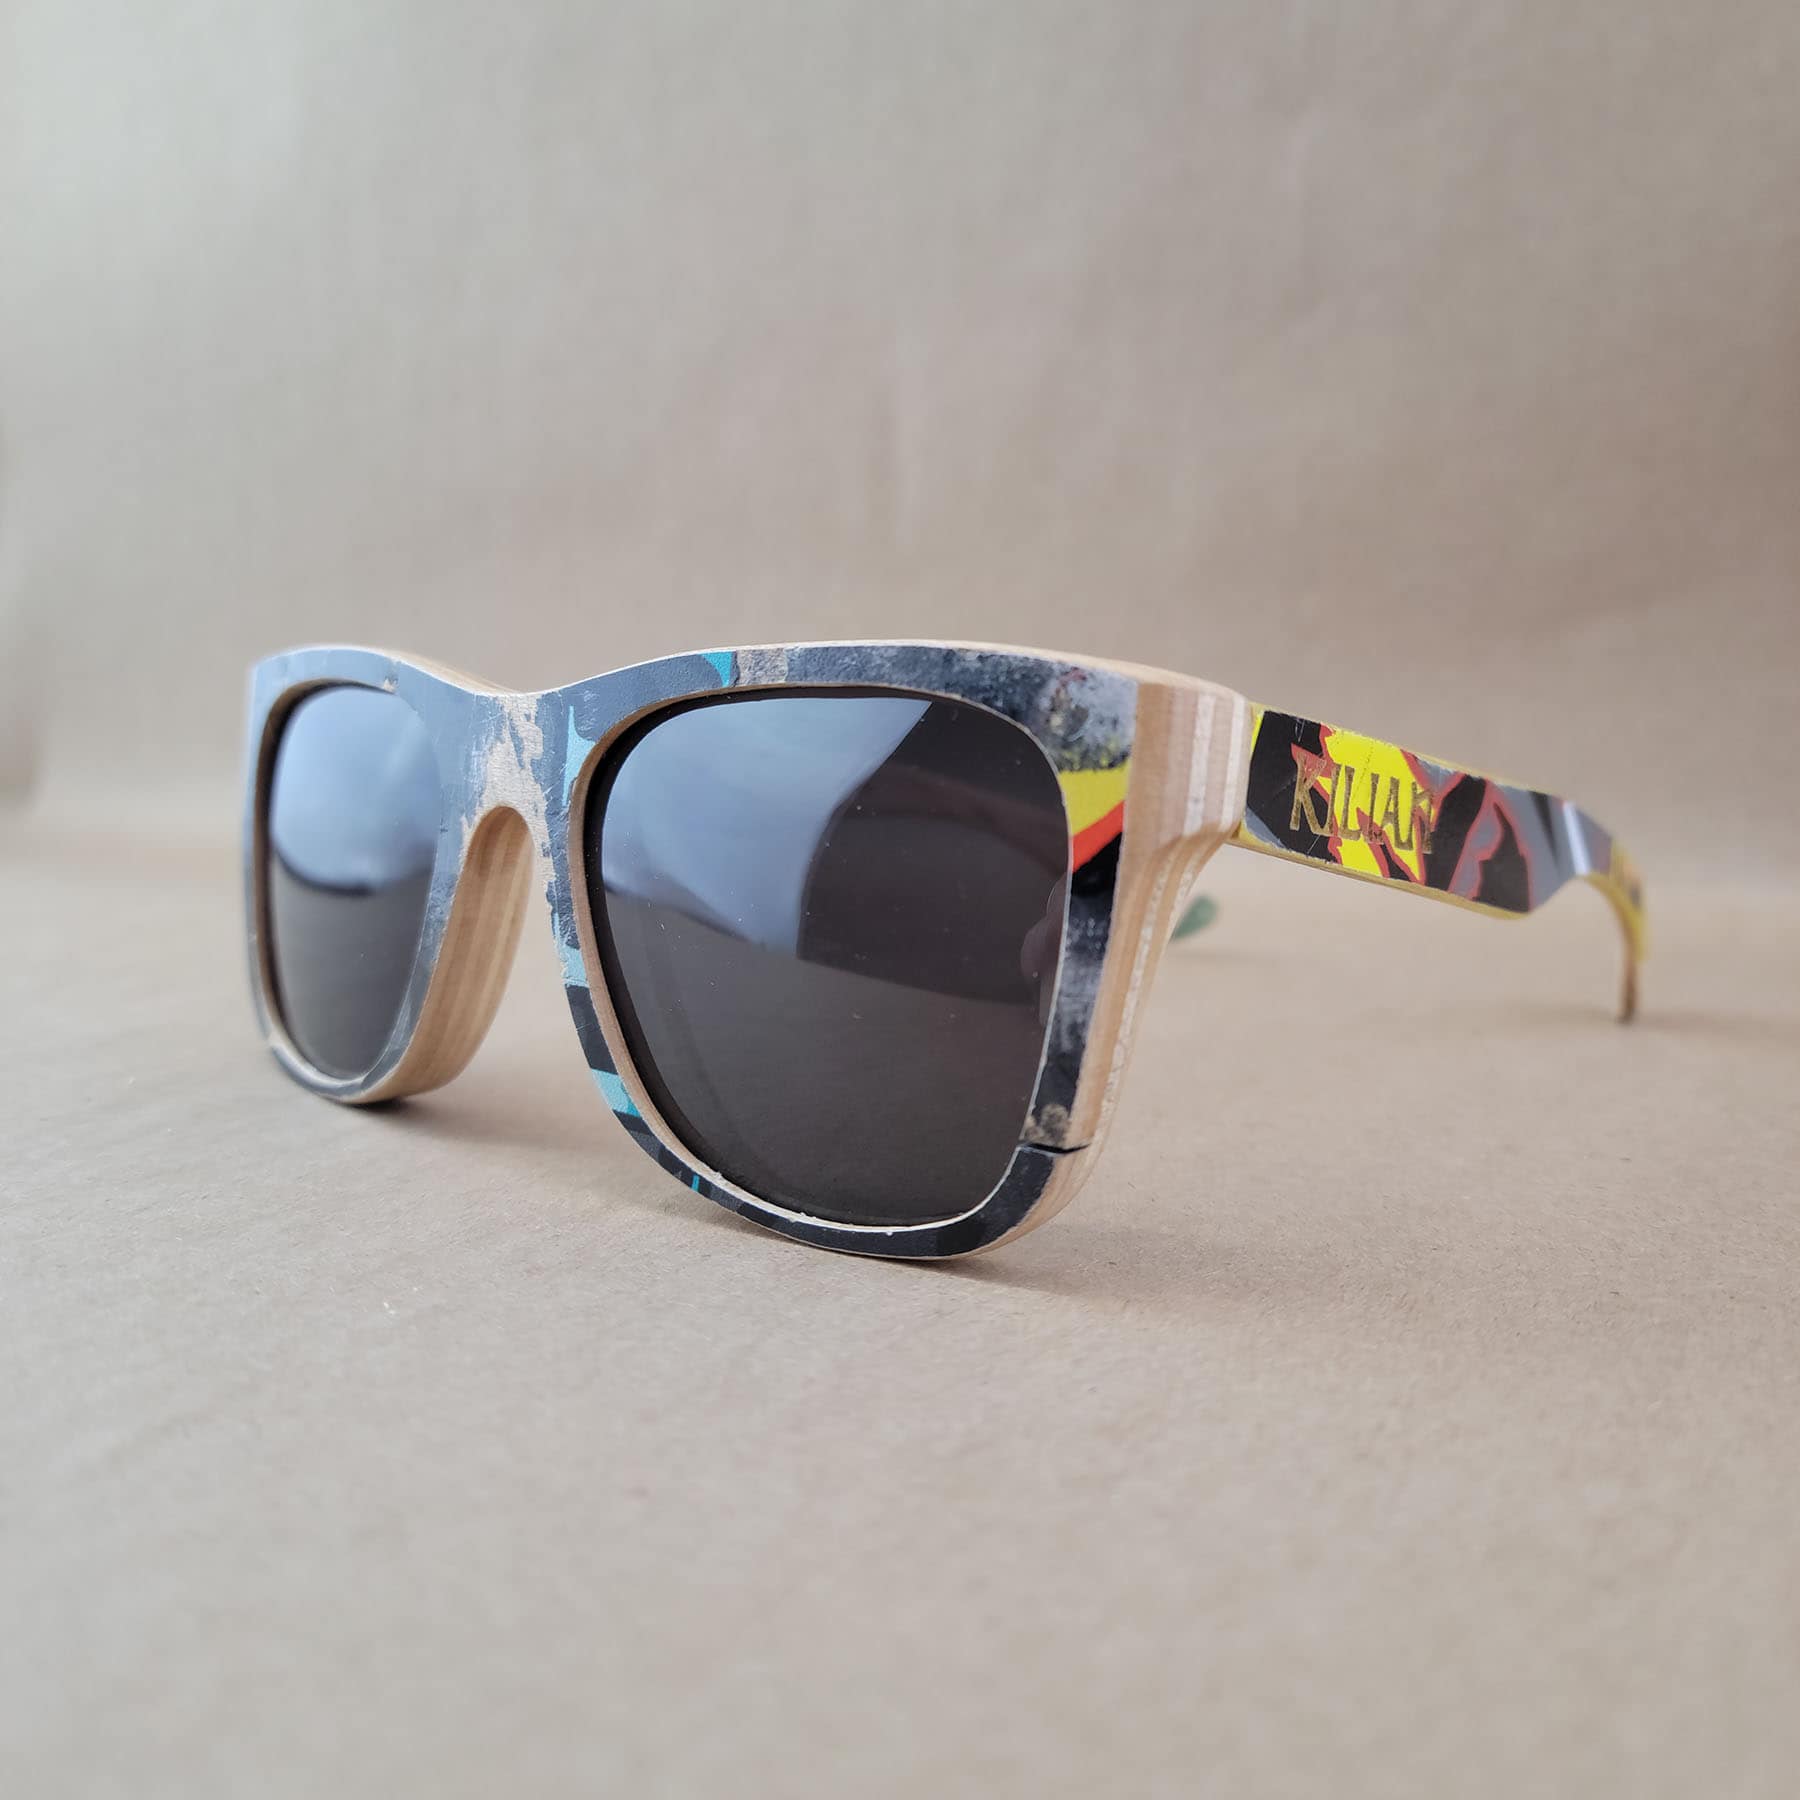 Kilian Martin Collection #1 – 3 of 6 Recycled Skateboard Sunglasses